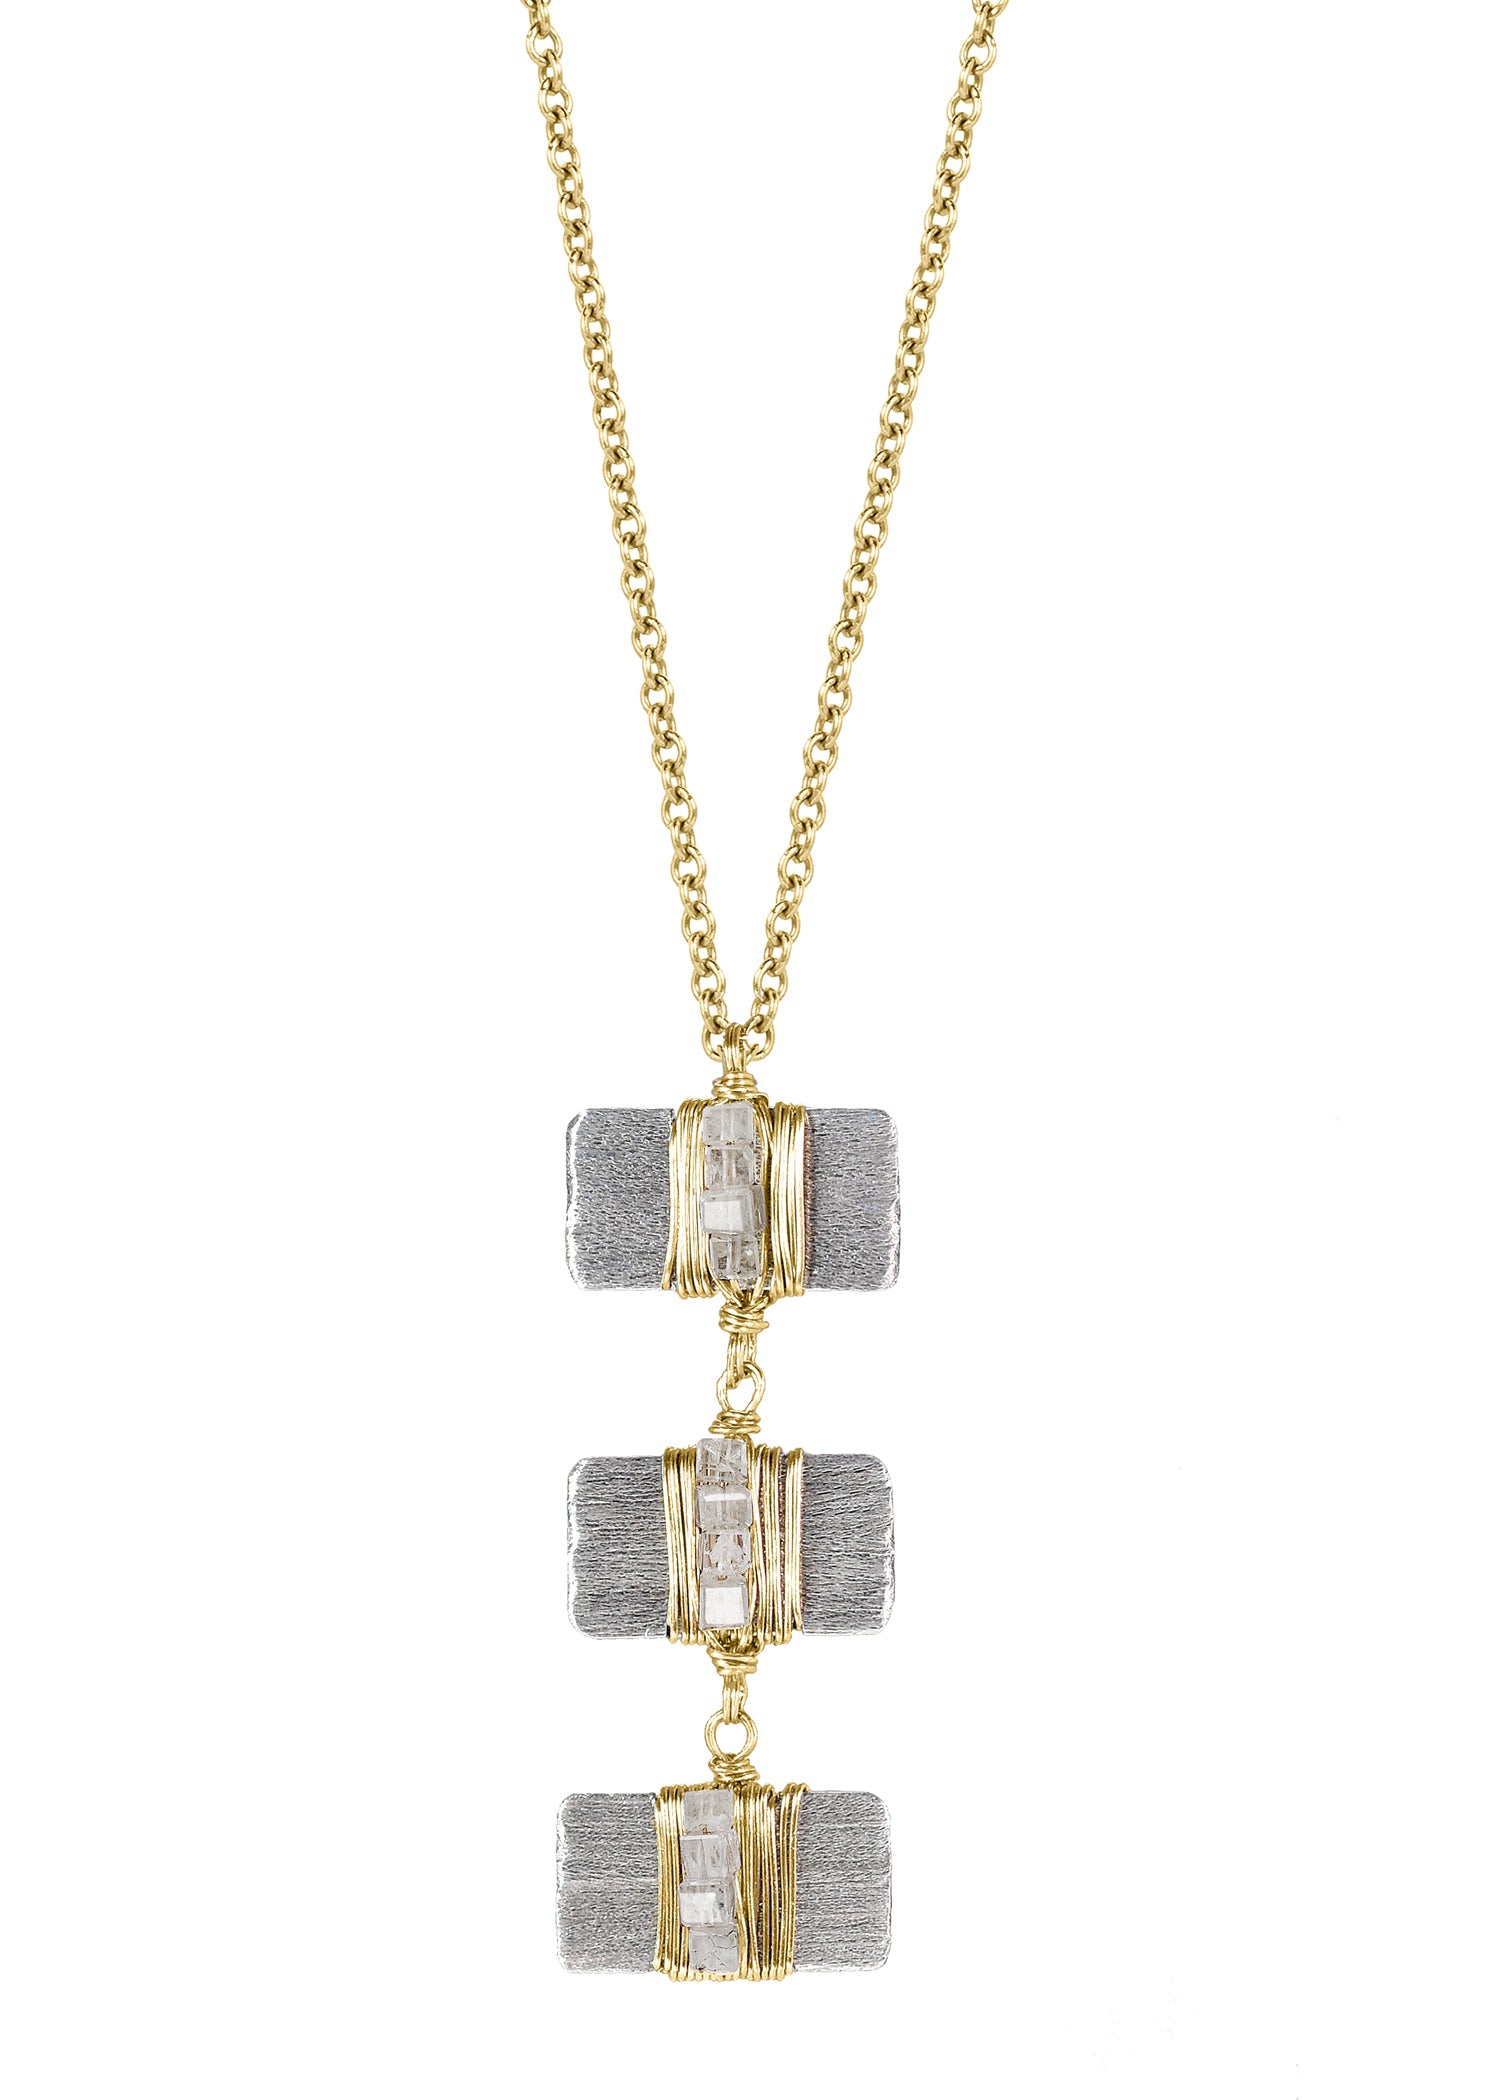 Diamond 14k gold Sterling silver Mixed metal Necklace measures 18" in length Pendant measures 1-1/8" in length and 1/2" in width Handmade in our Los Angeles studio